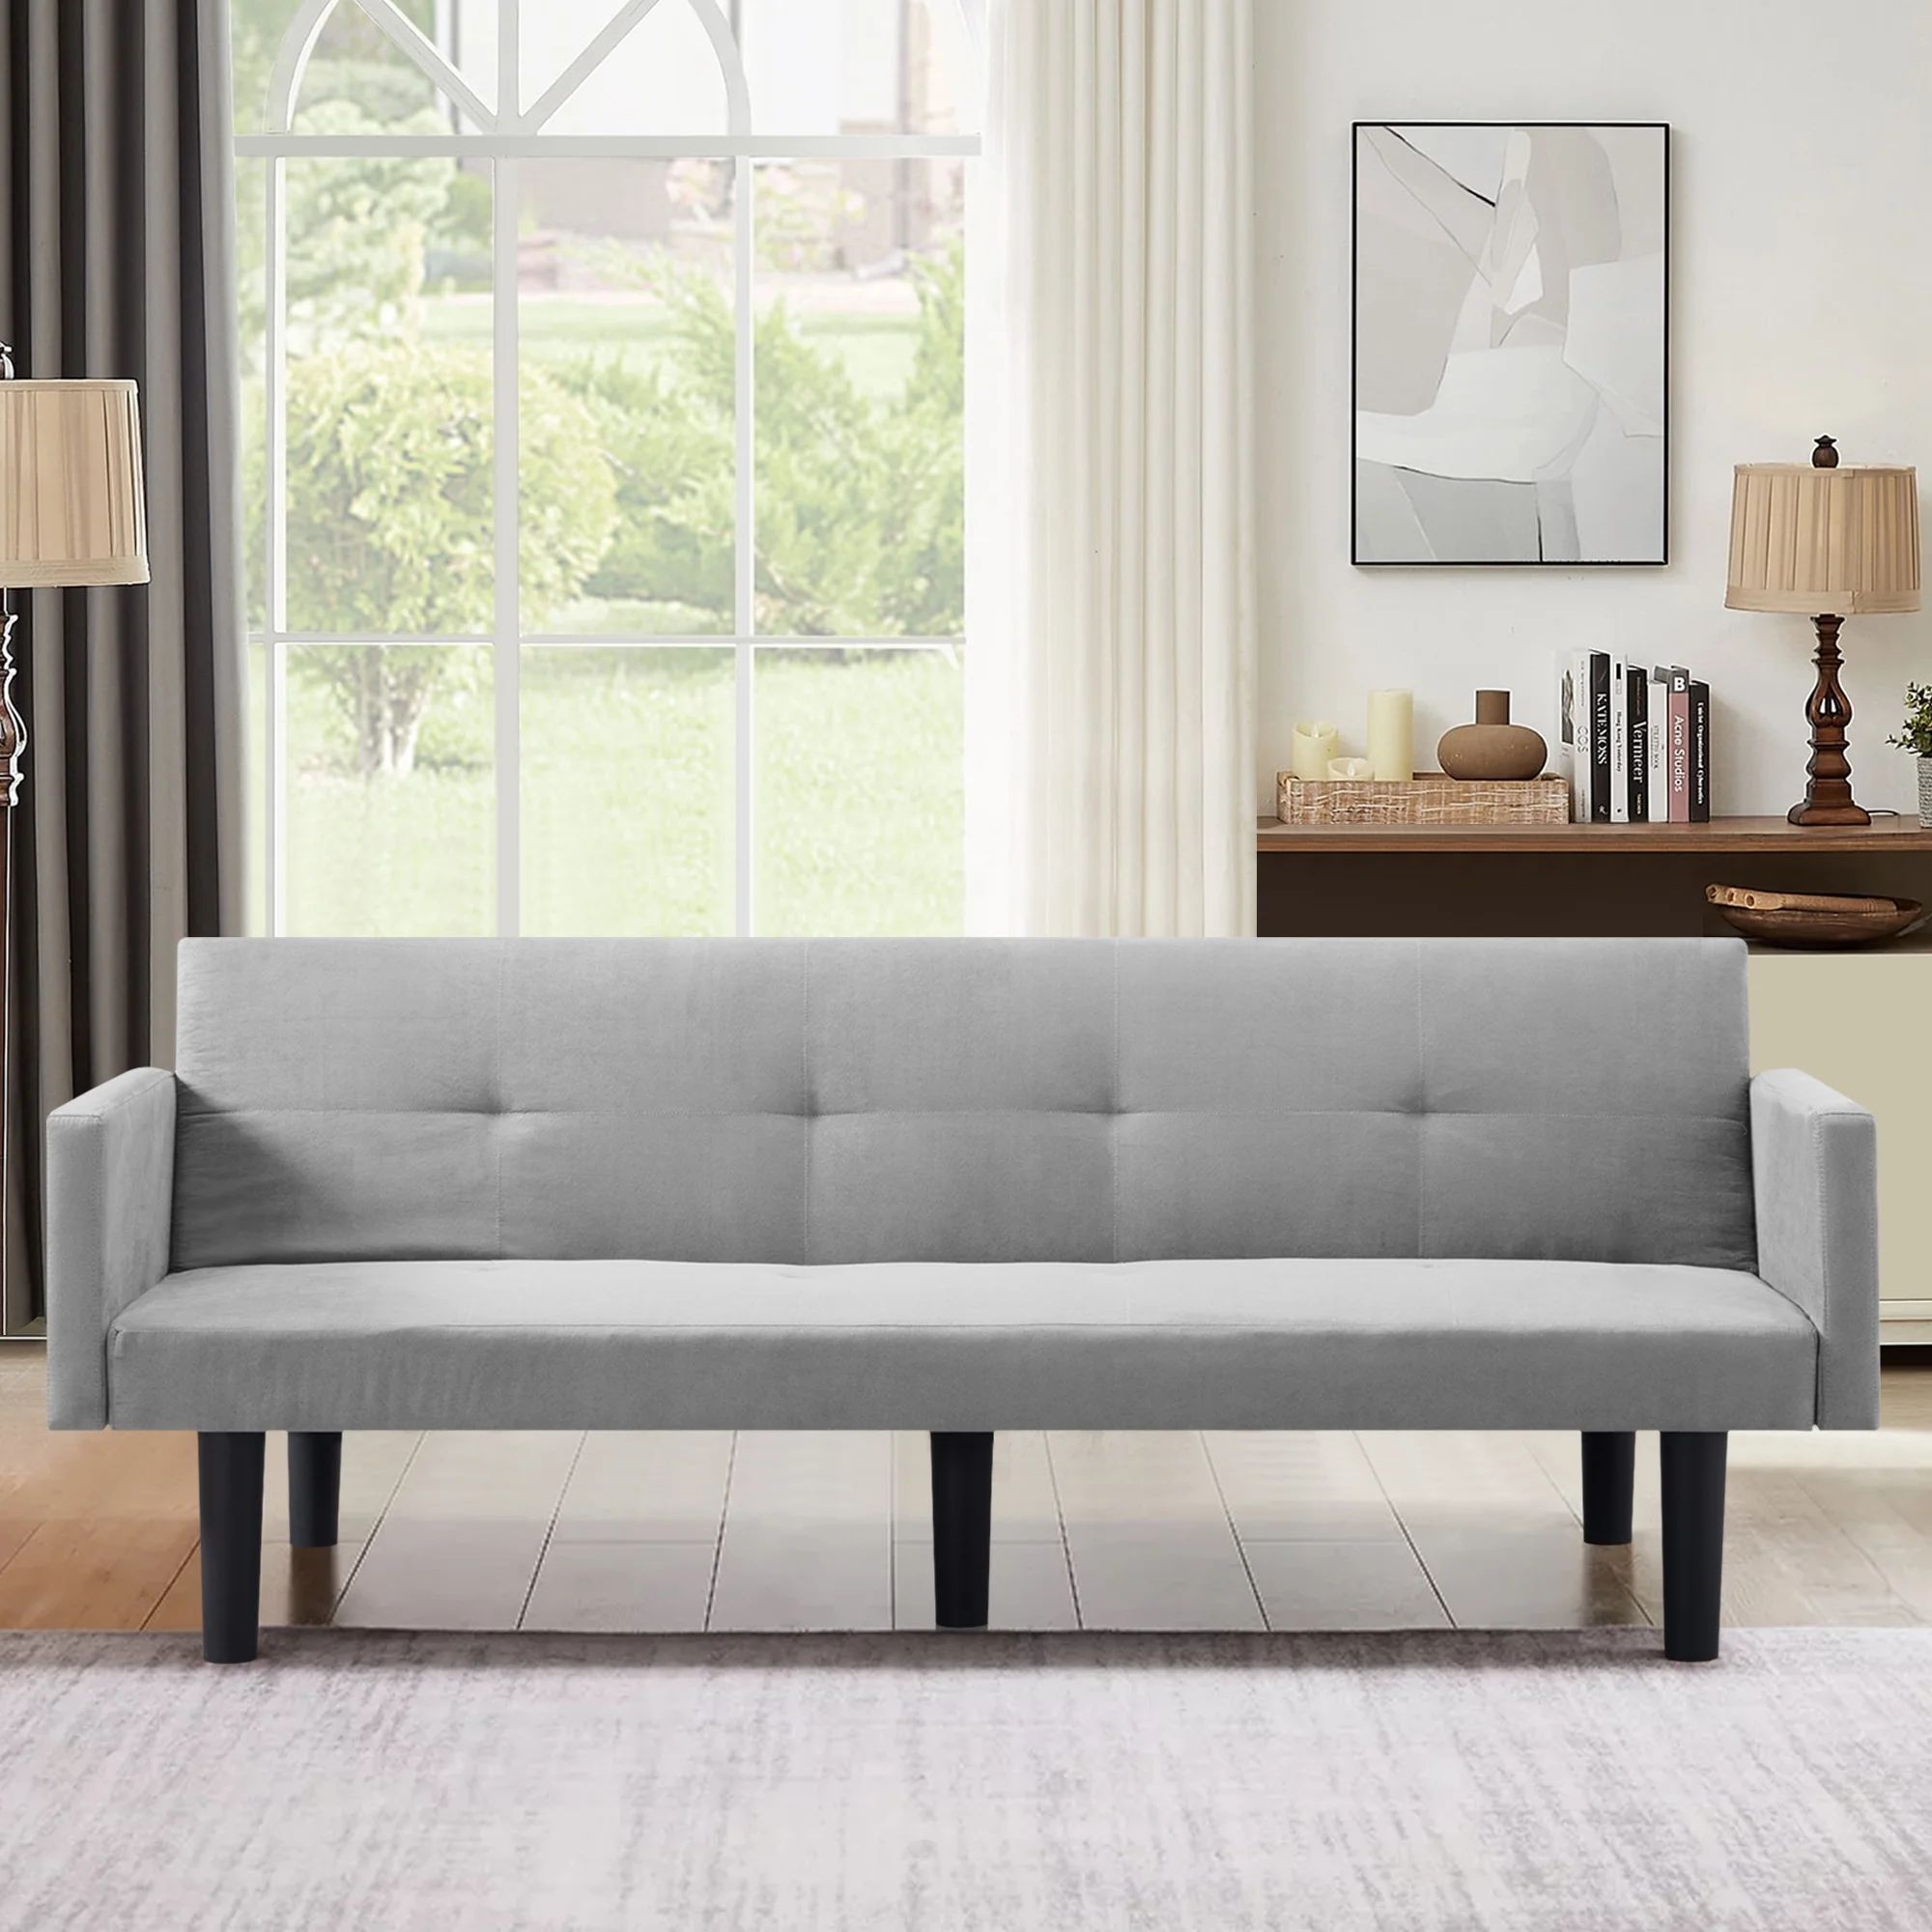 75" Futon Sofa Bed, Modern Faux Suede Convertible Futon Sofa Bed with Adjustable Back, Light Gray | Walmart (US)